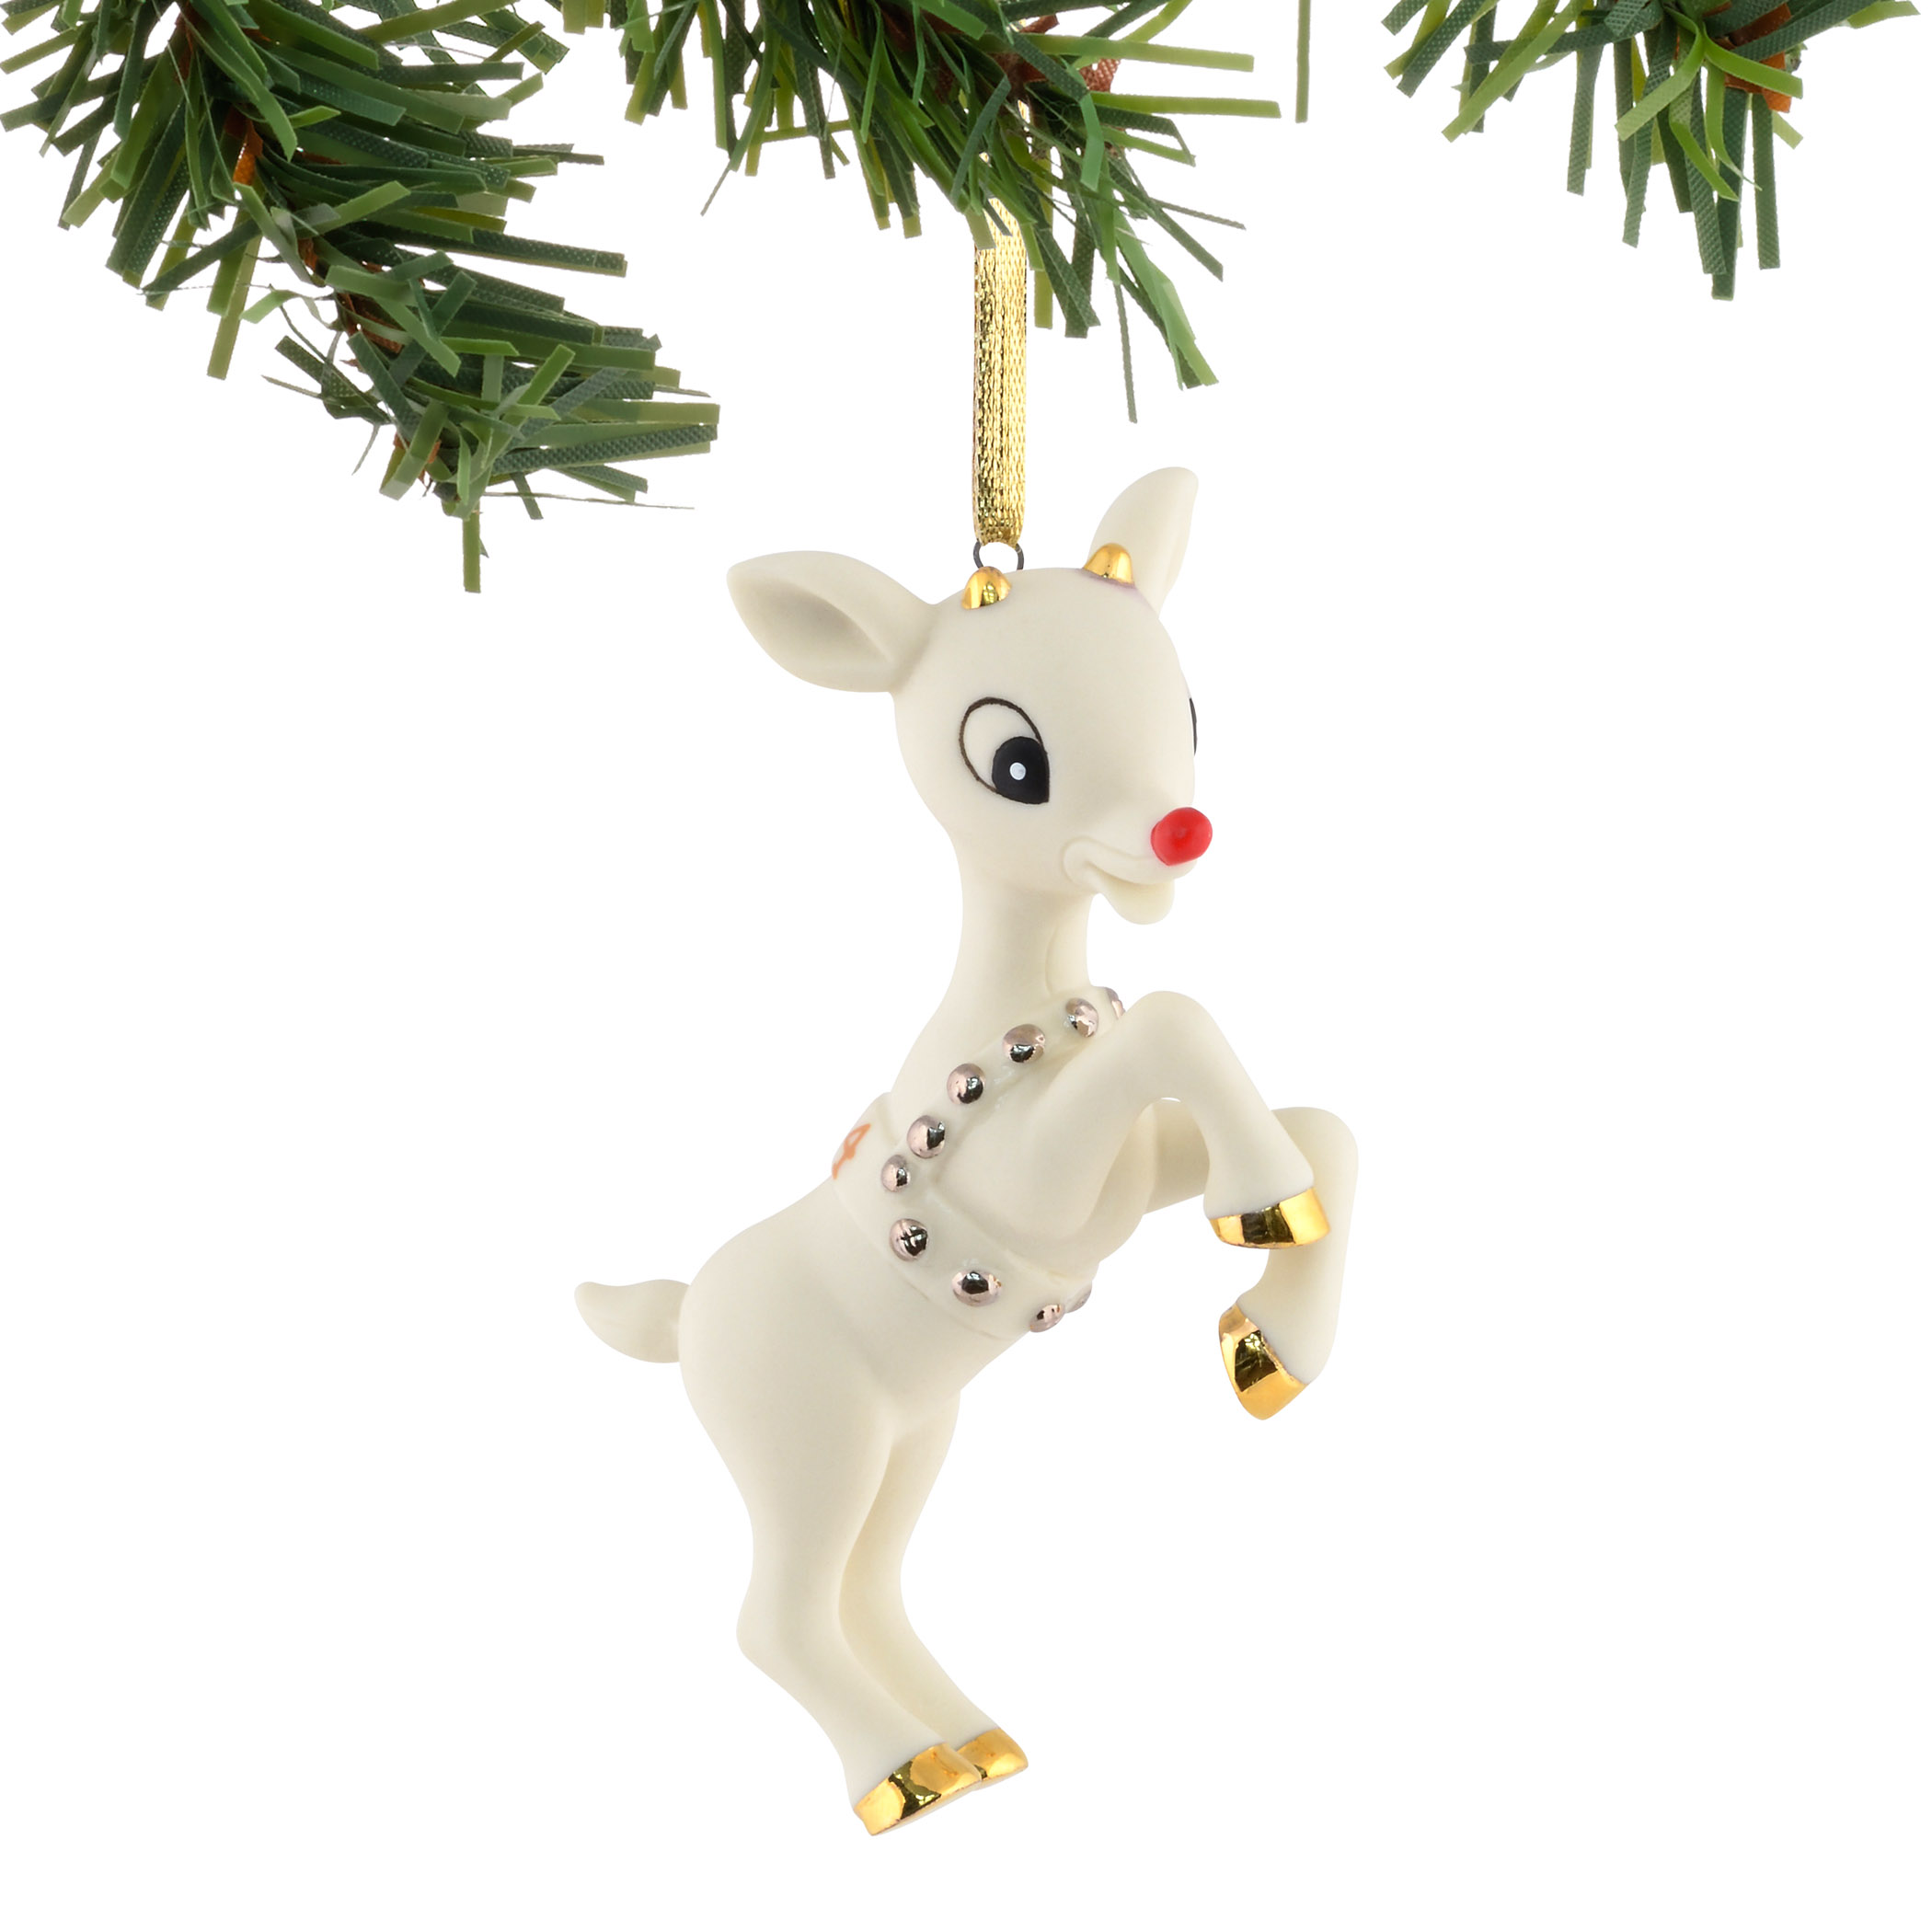 Dept 56 Rudolph the Red Nose Reindeer Bisque Christmas Ornament